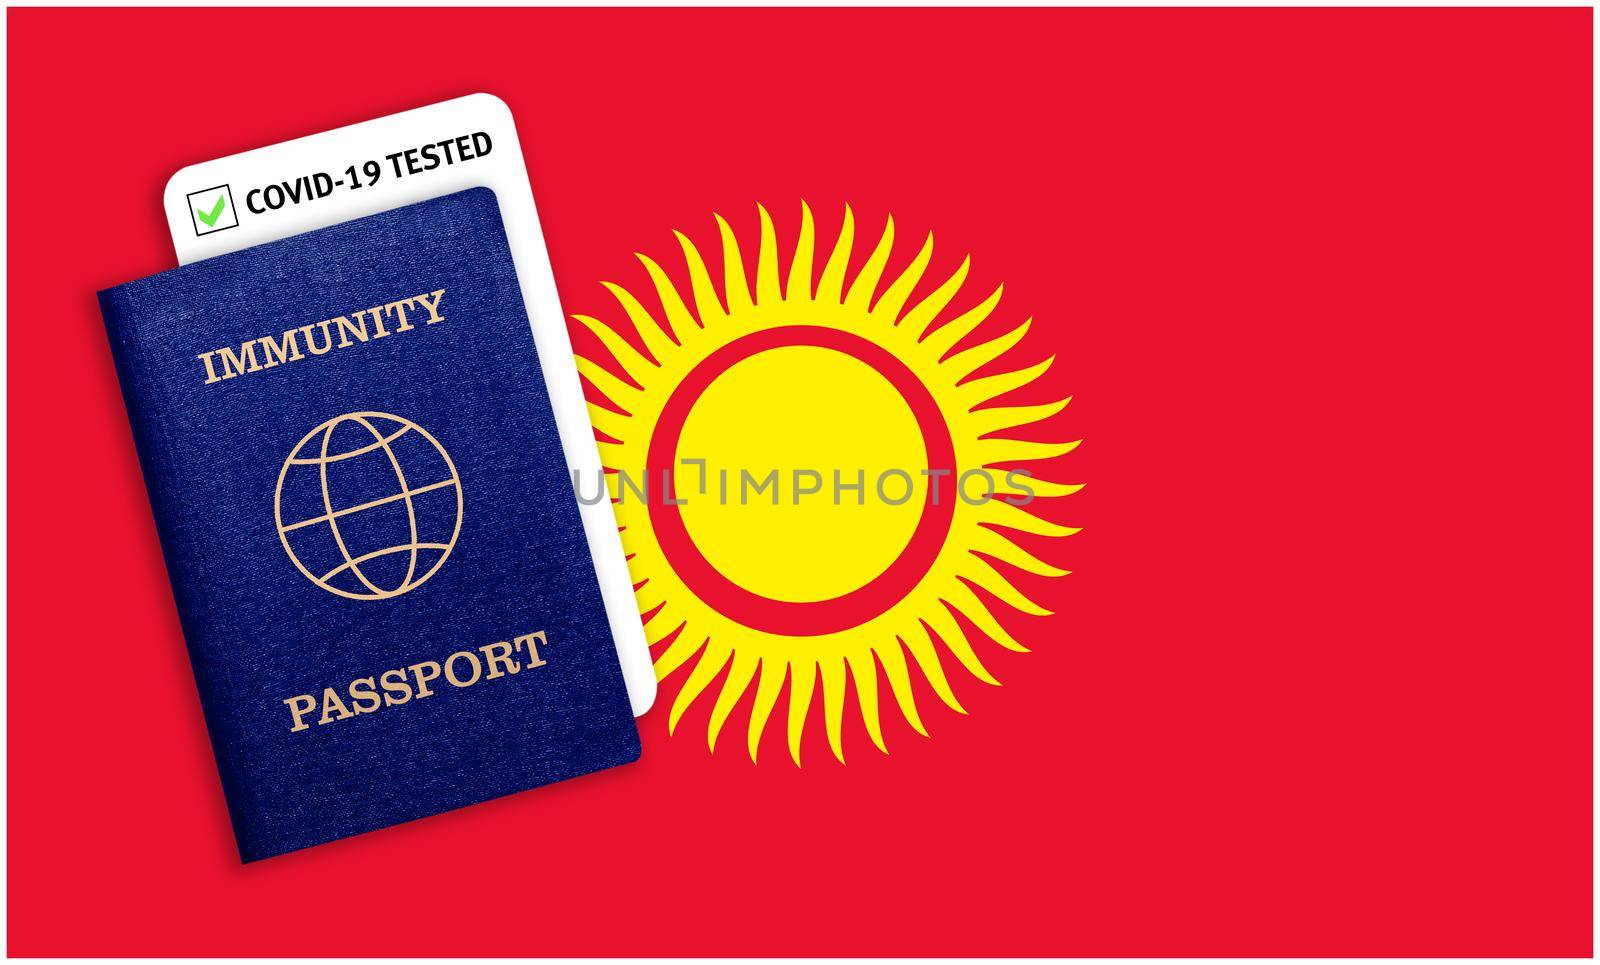 Concept of Immunity passport, certificate for traveling after pandemic for people who have had coronavirus or made vaccine and test result for COVID-19 on flag of Kyrgyzstan